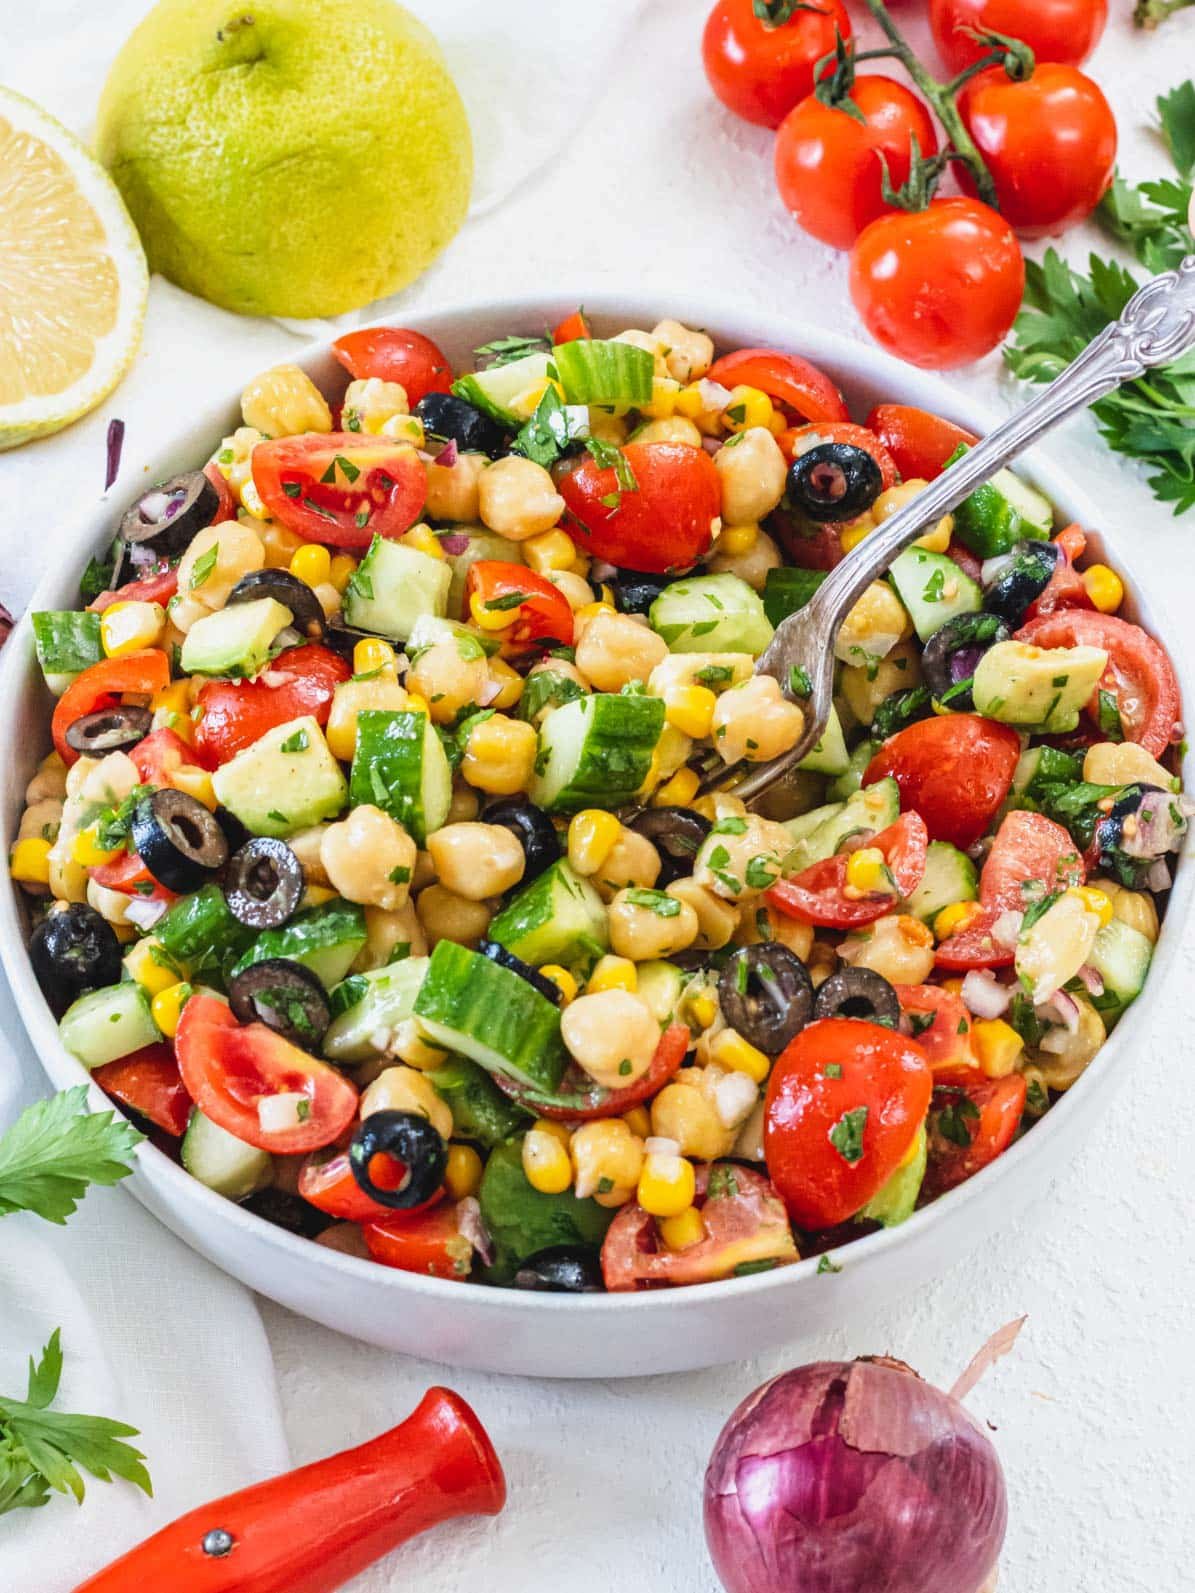 Chickpea salad with a silver fork and tomatoes